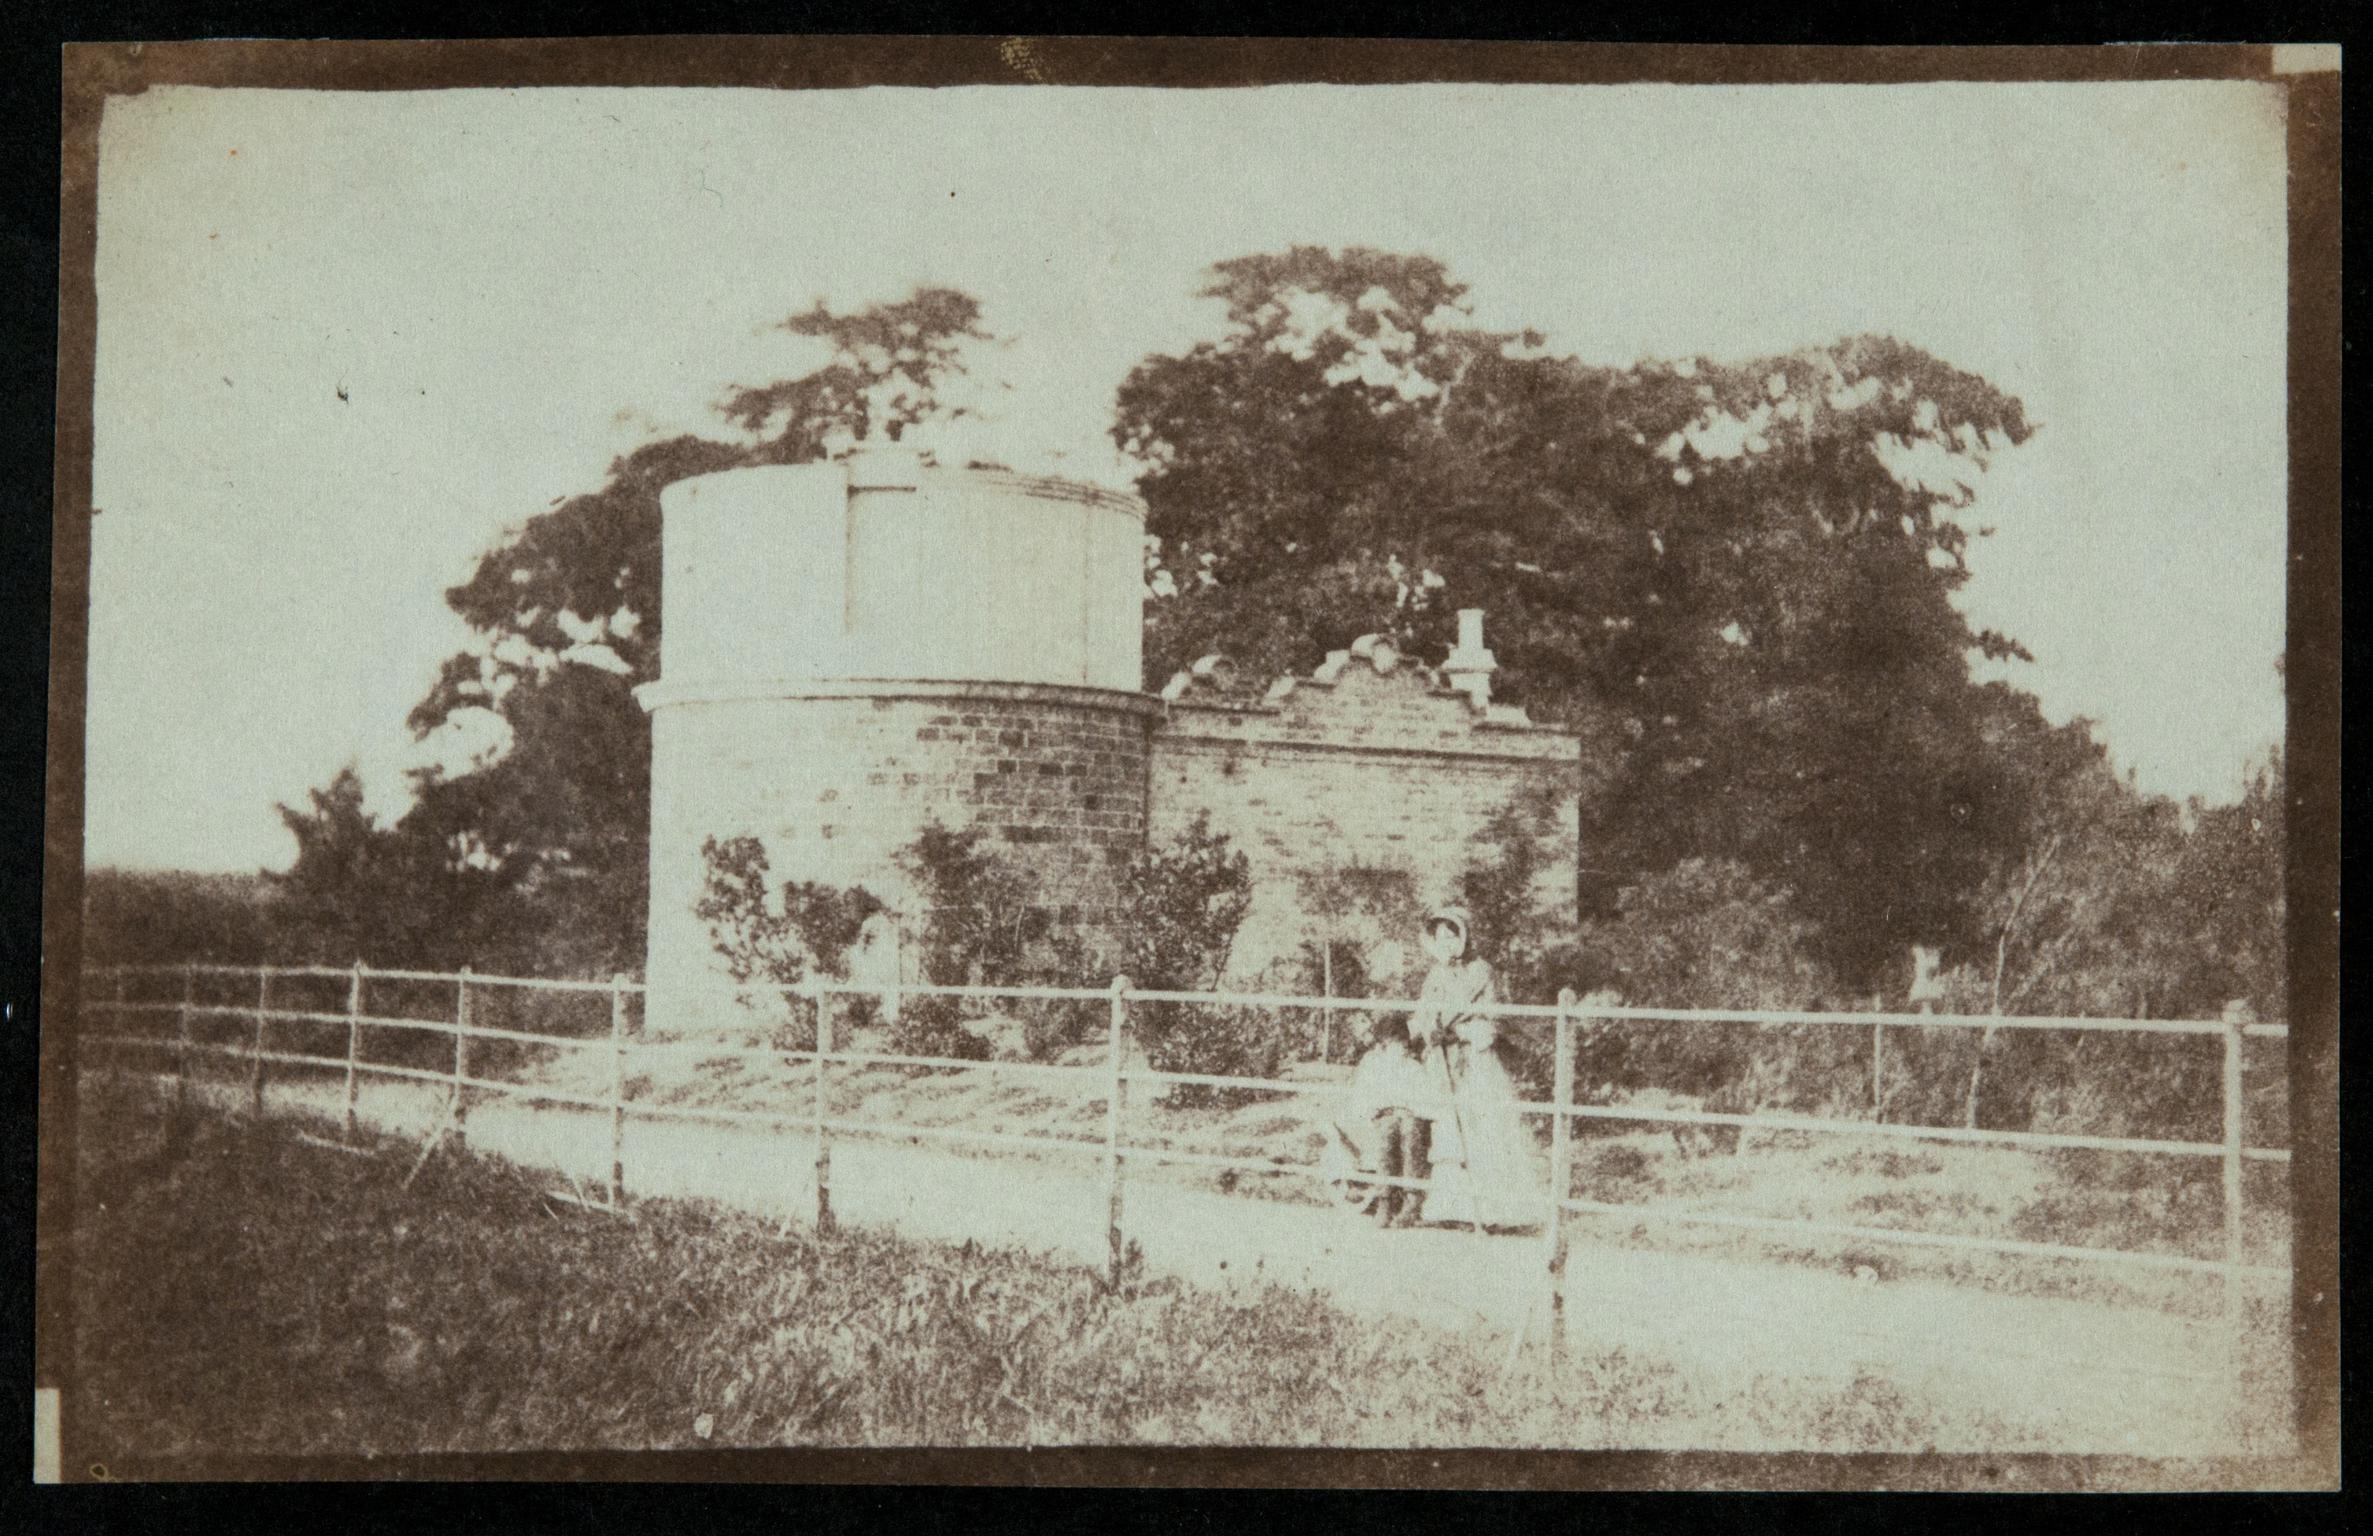 Observatory at Penllergare, photograph